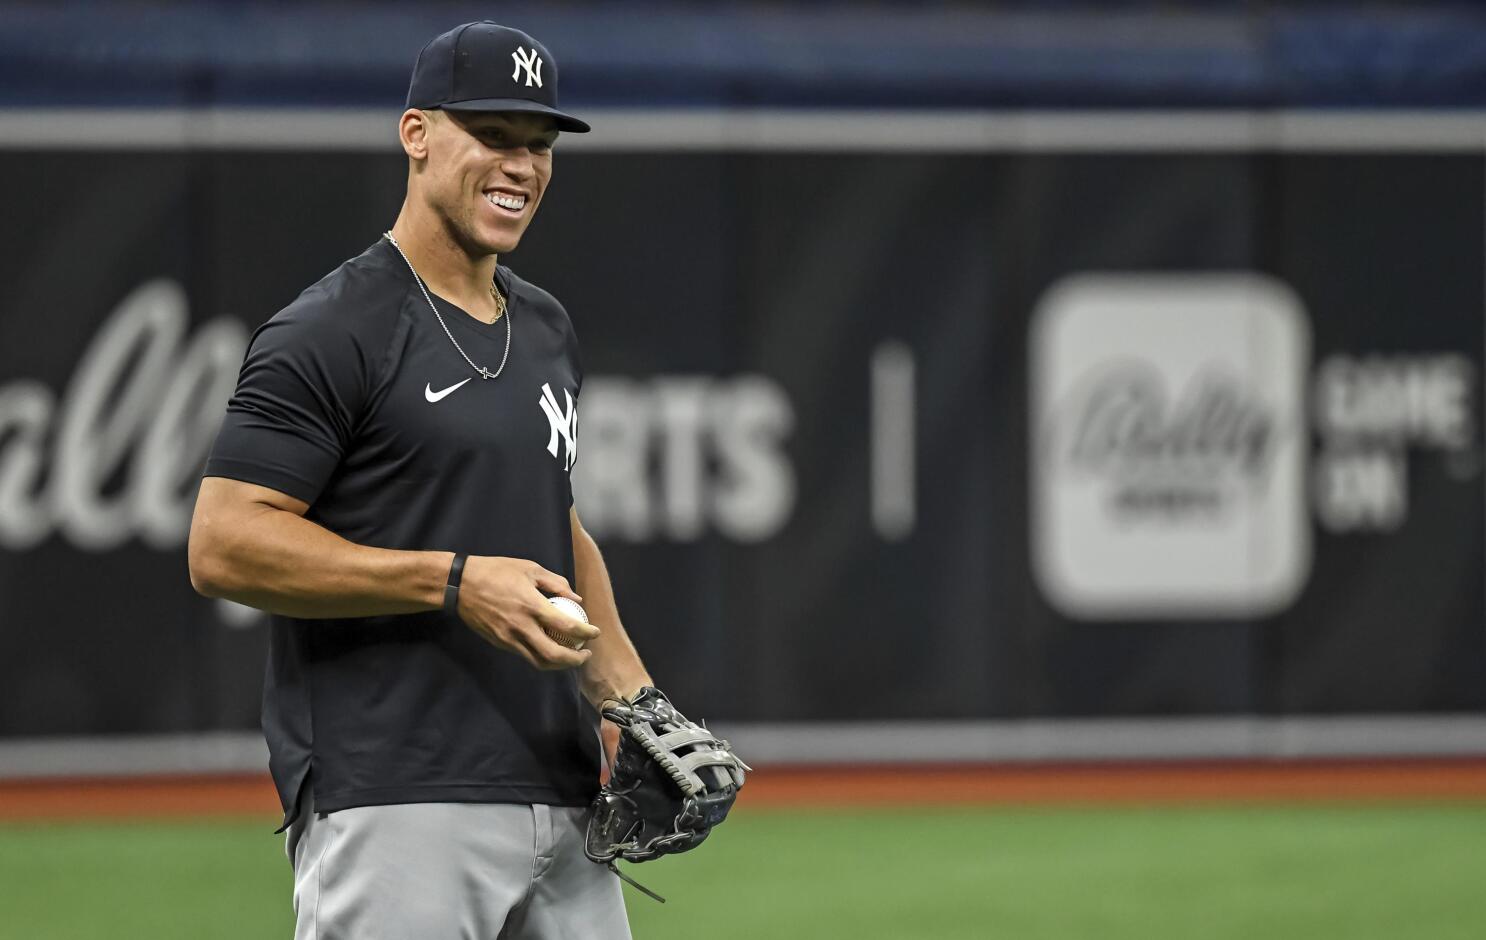 Aaron Judge goes 1-for-4 in return to Yankees lineup